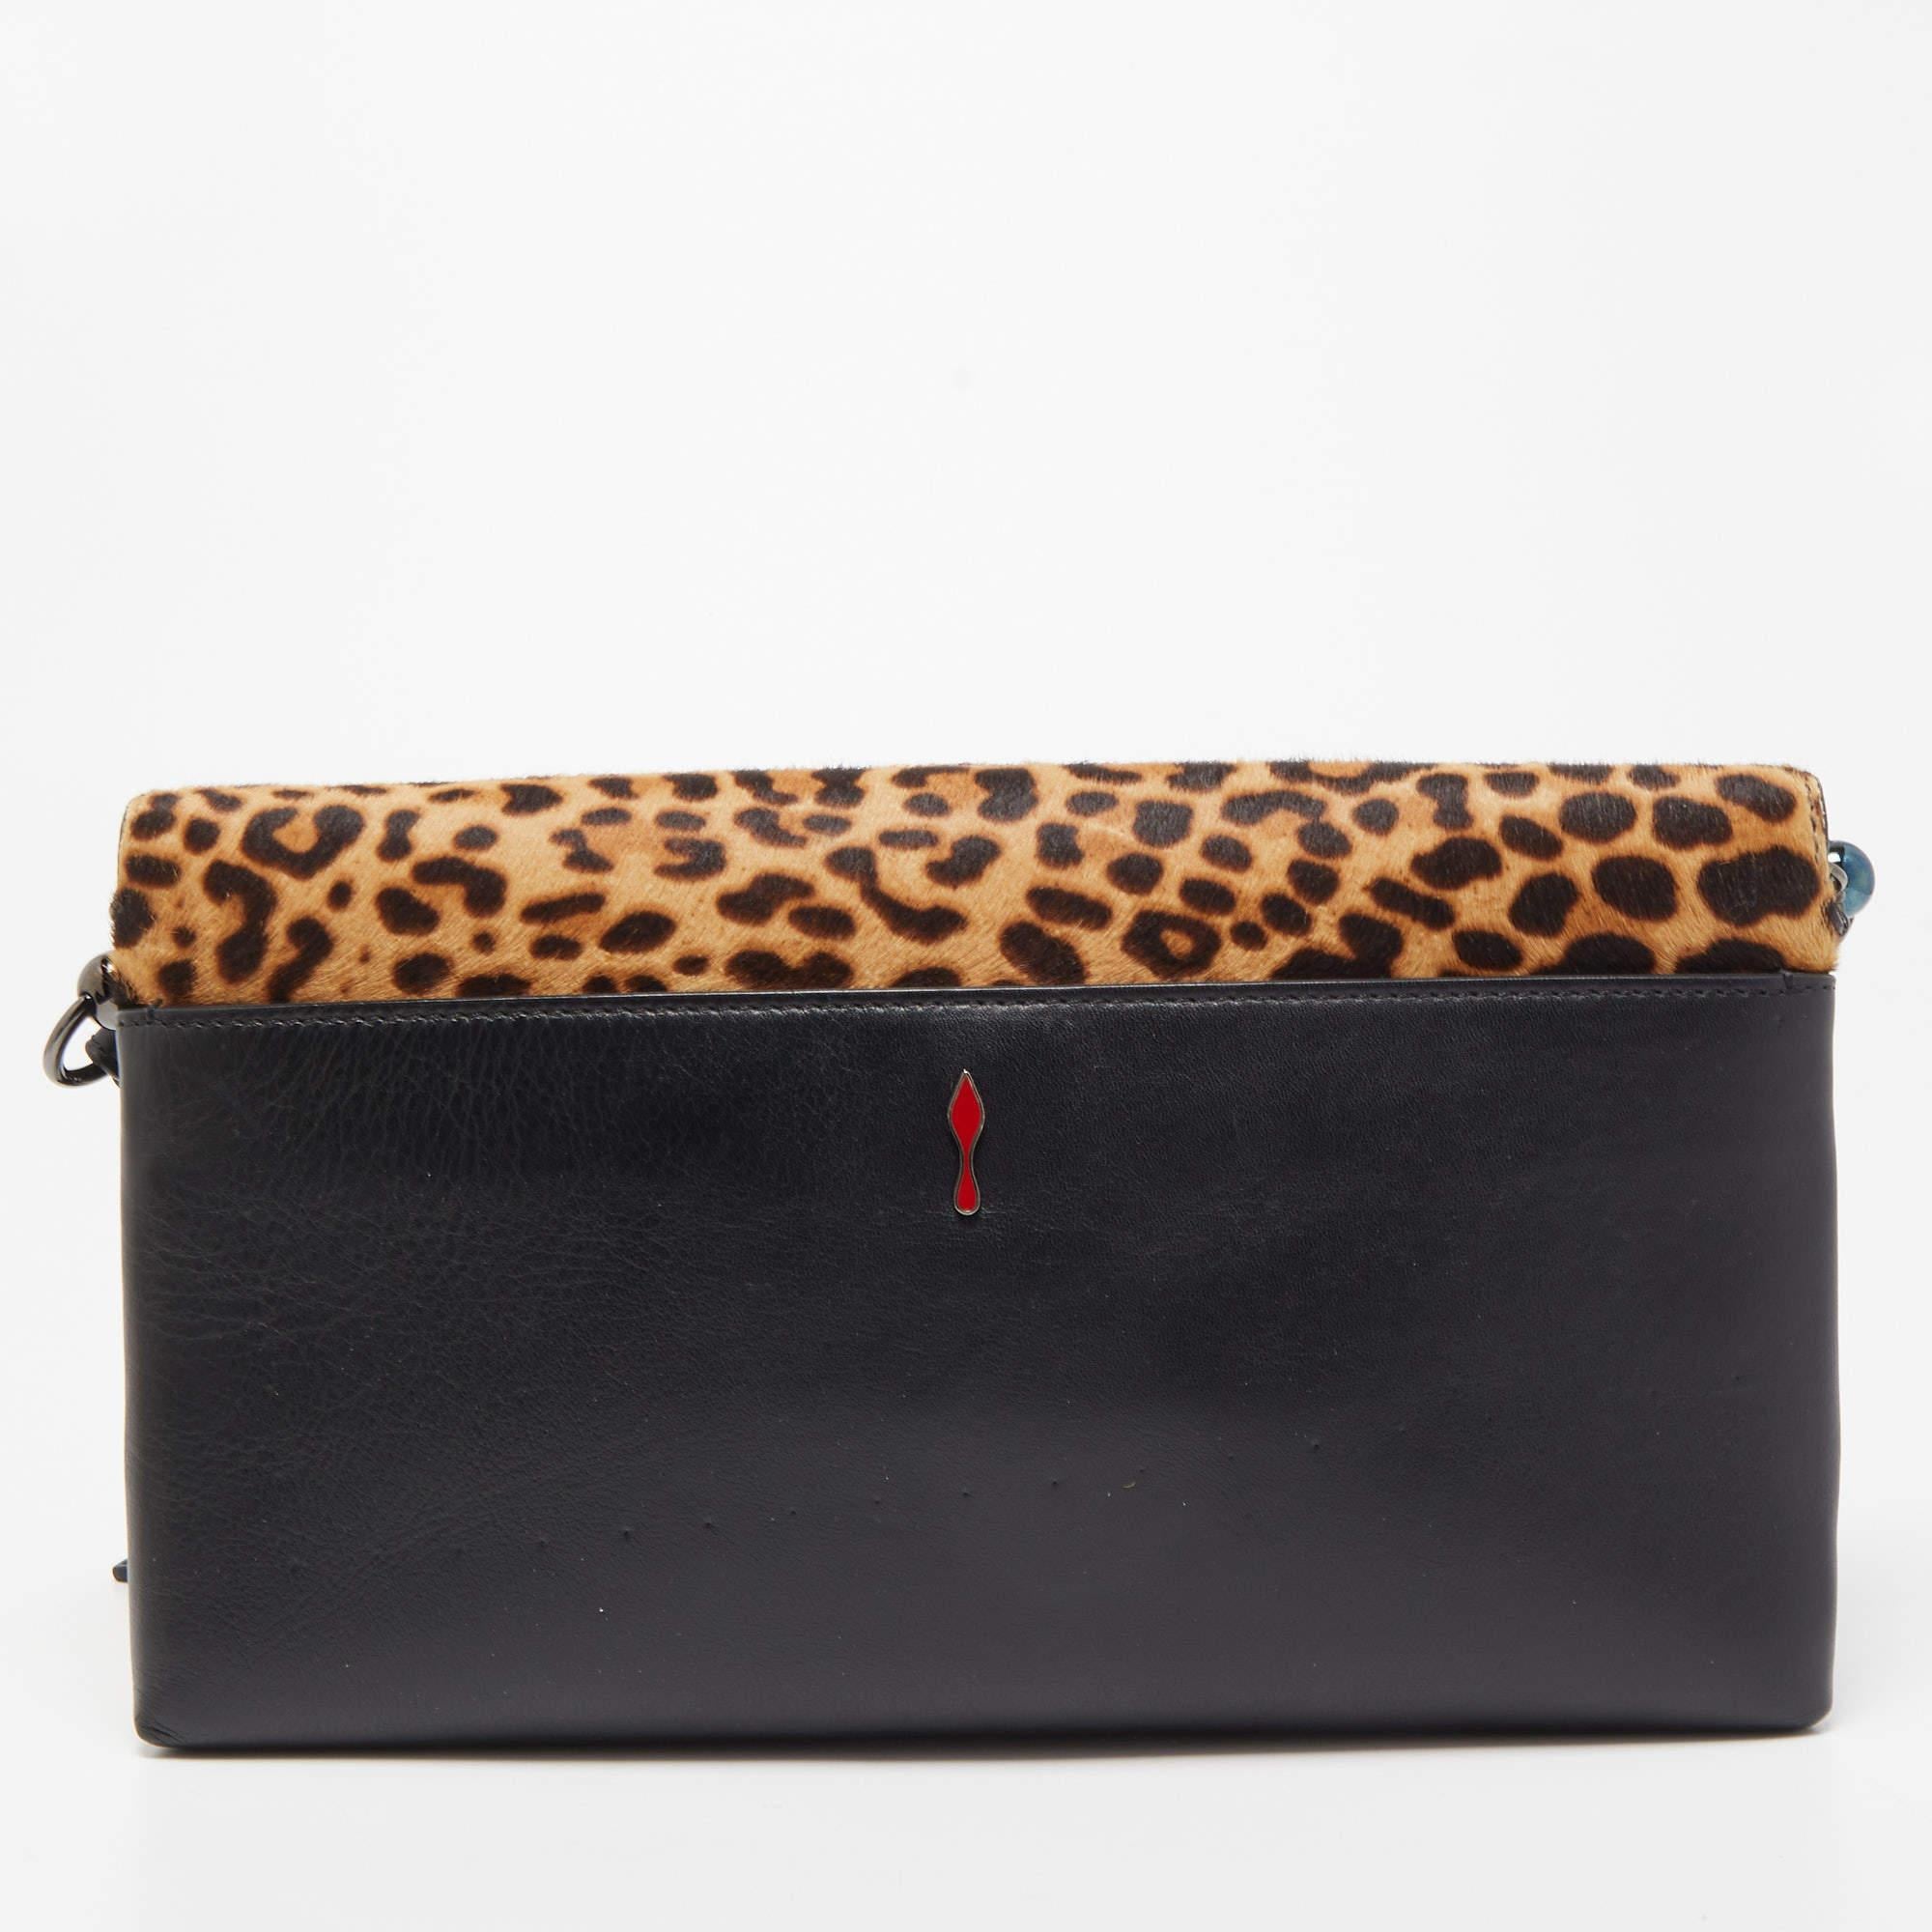 Trust this Christian Louboutin bag to be light, durable, and comfortable to carry. It is crafted beautifully using the best materials to be a durable style ally.

Includes: Metal Plate Mirror